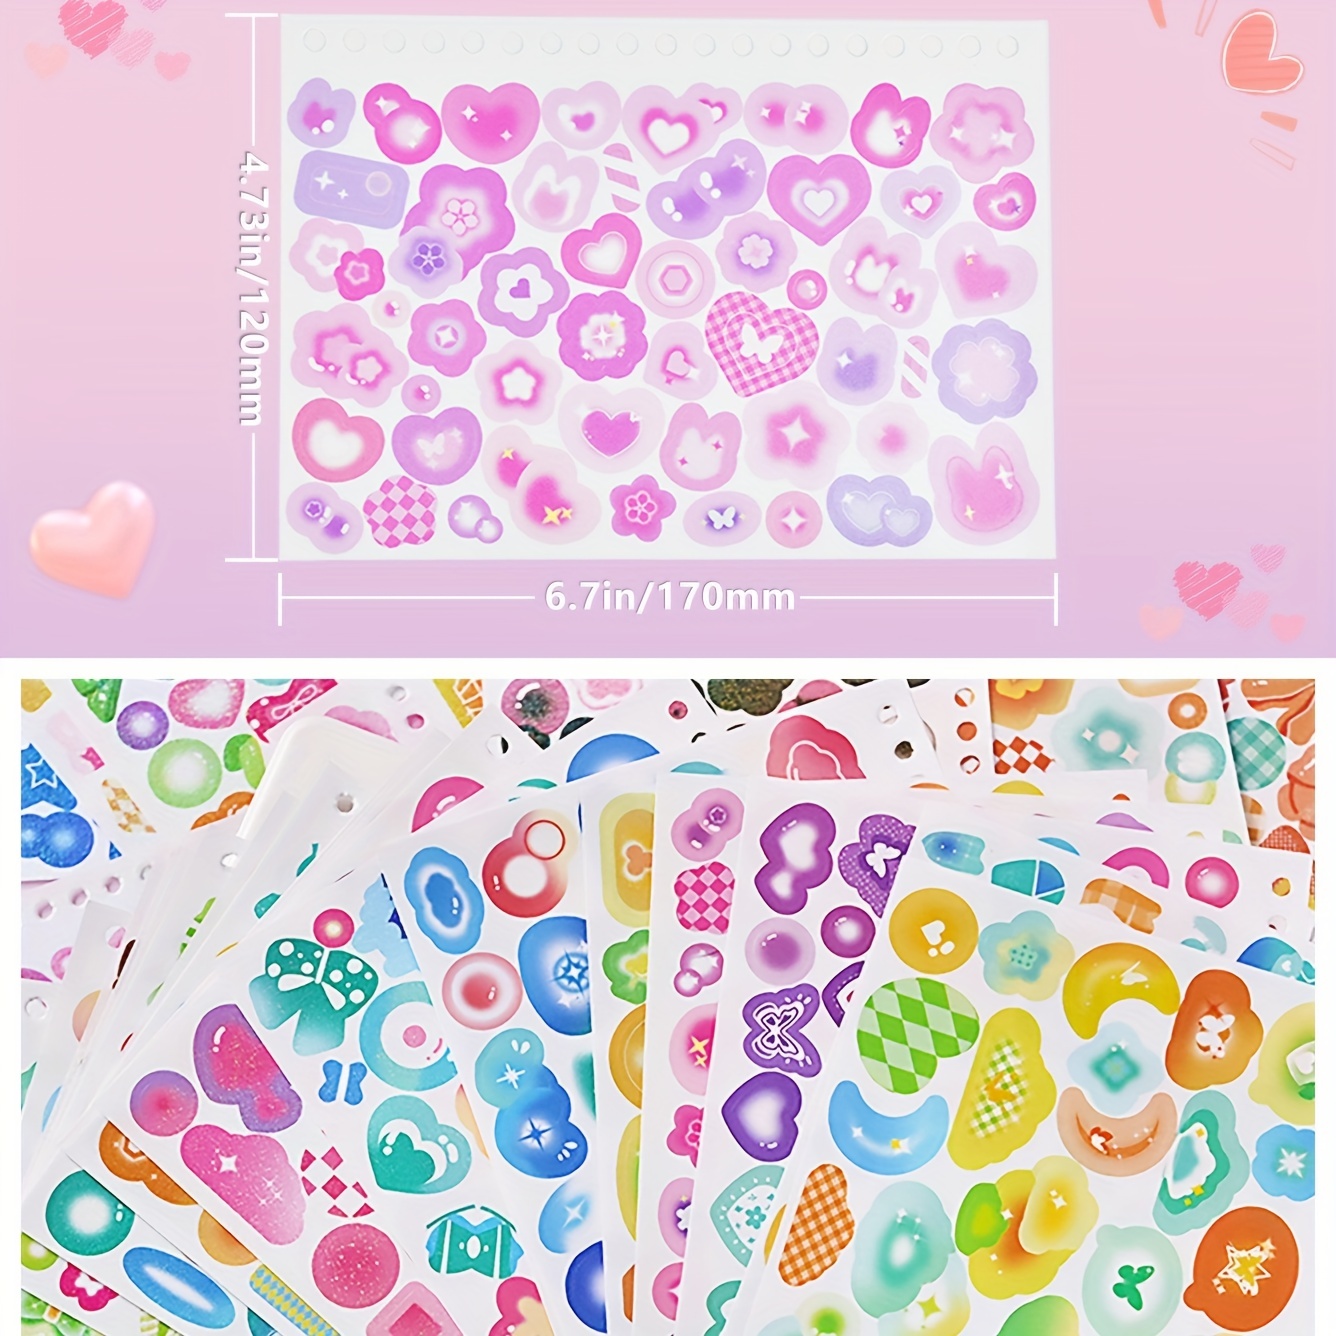 Aesthetic Ins Love Stickers for Scrapbooking, Korean Stationery